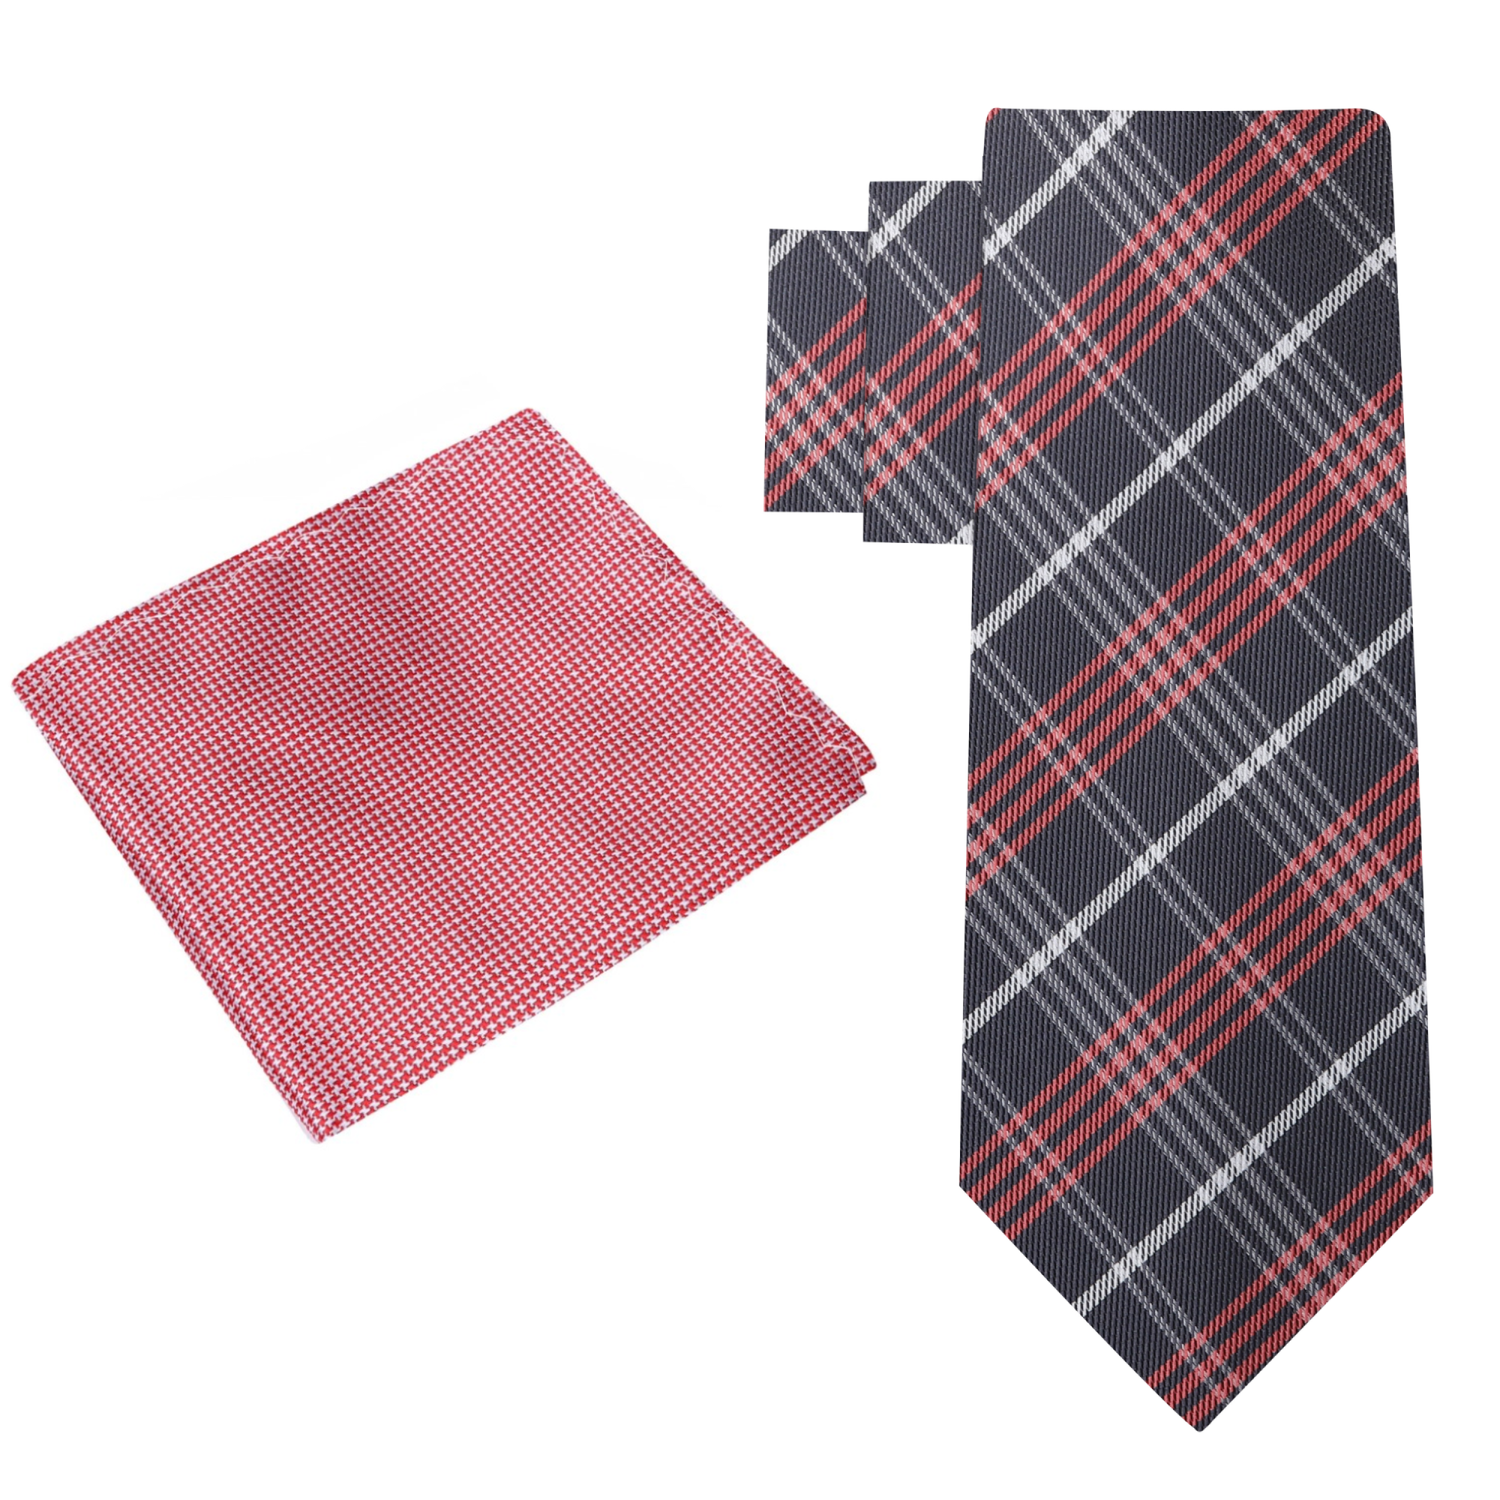 Alt view: Charcoal Grey, Red, White Plaid Necktie and Grey, Red Hounds Tooth Square